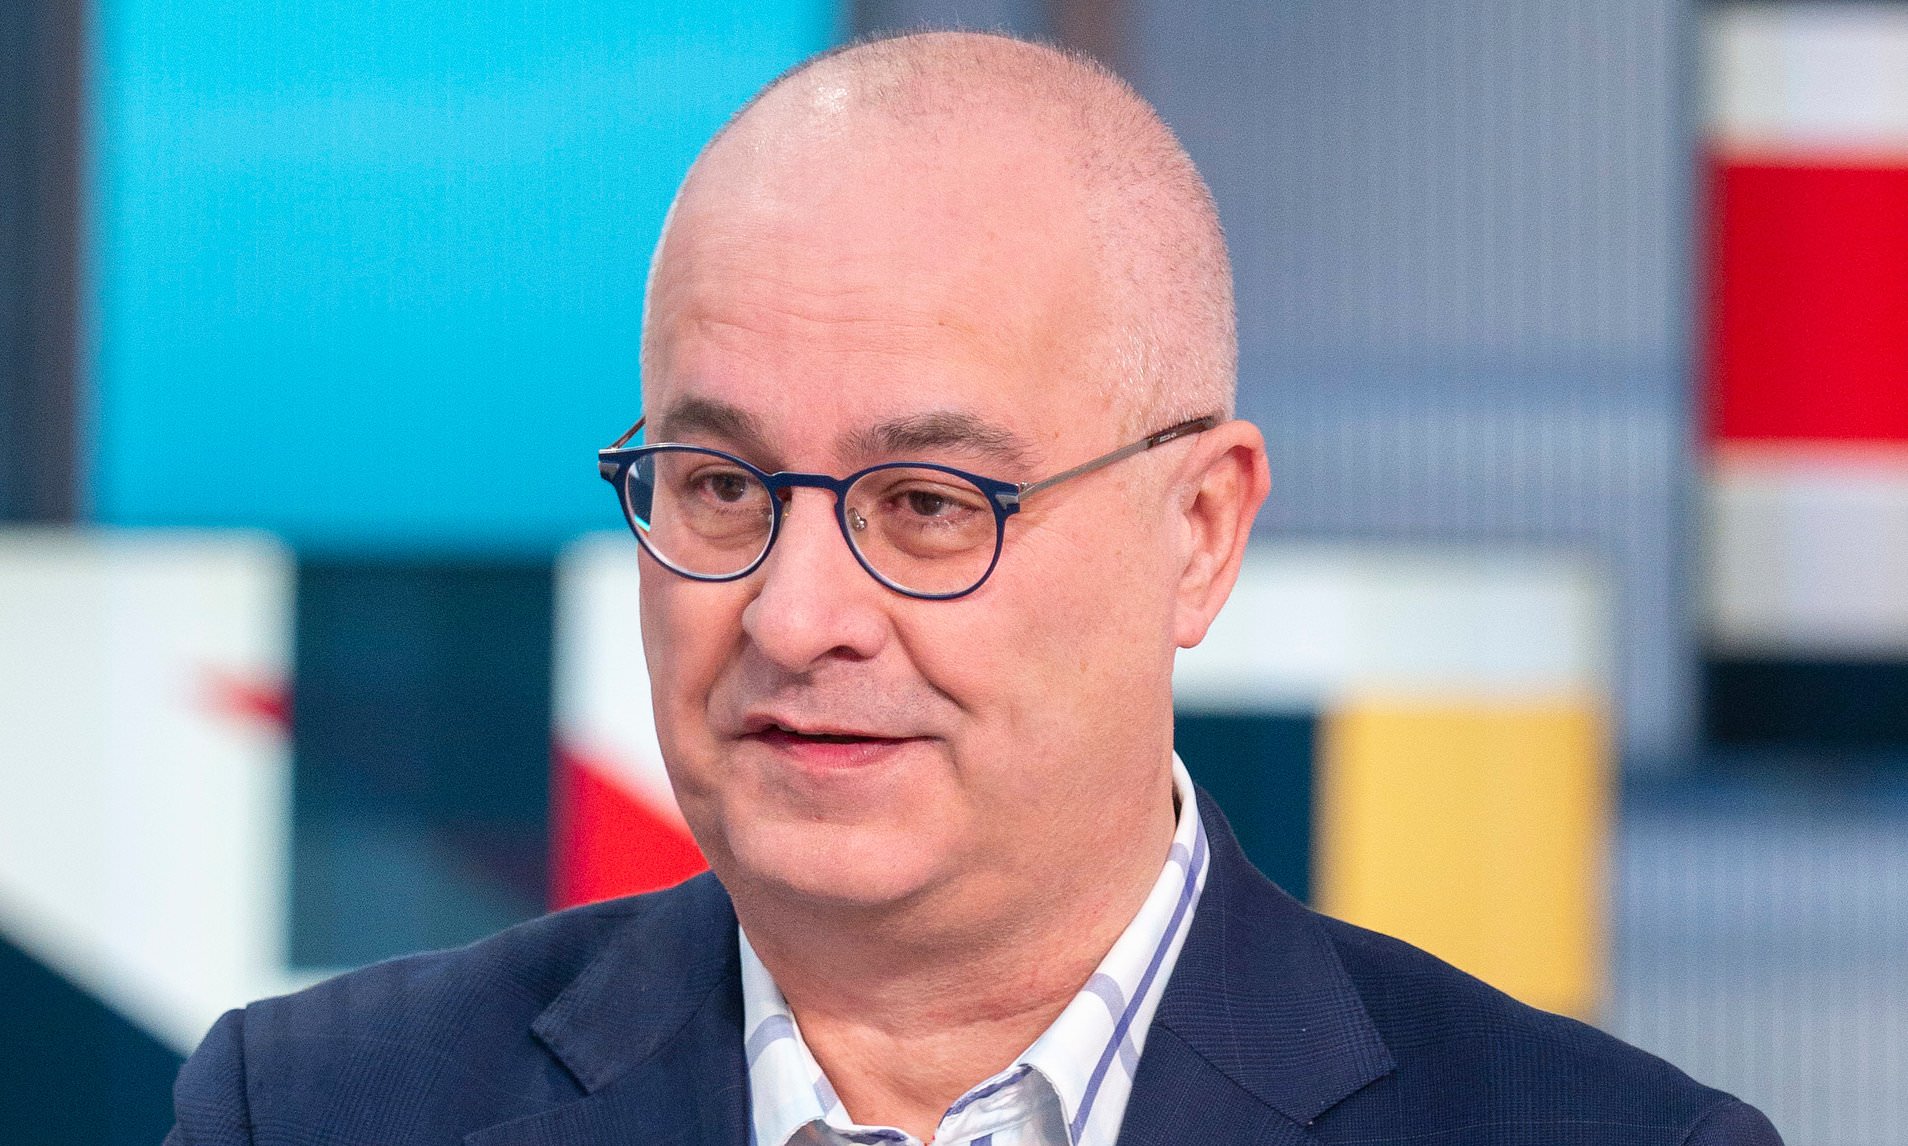 Iain Dale walked off the set of Good Morning Britain during a debate about social care and austerity measures